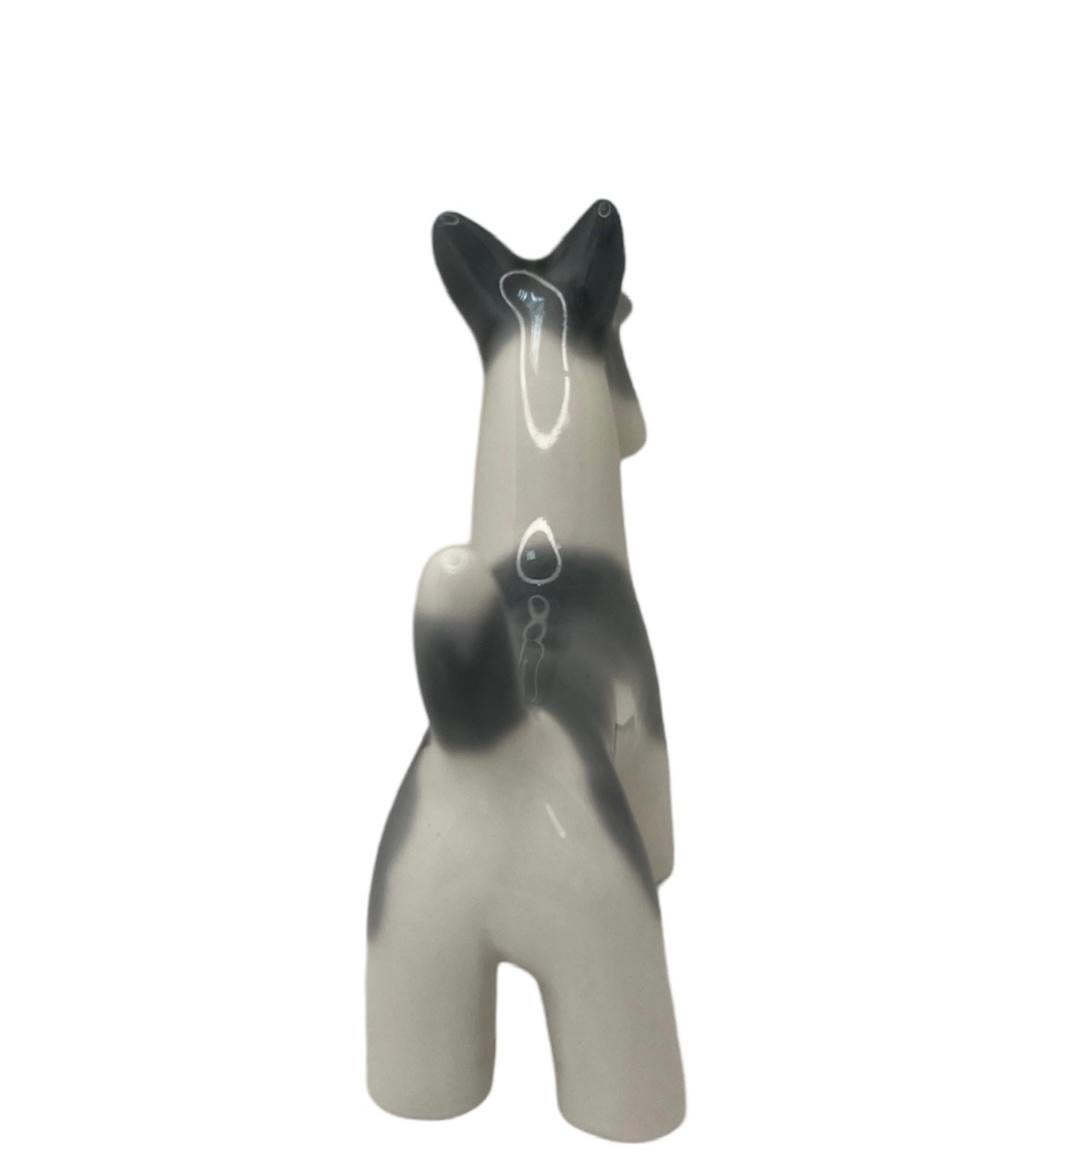 This is a Lladro porcelain mini figurine of a dog. It depicts a hand painted grey blue and white Scottish Terrier dog standing up and frowning. The Lladro Nao hallmark is below the figurine.